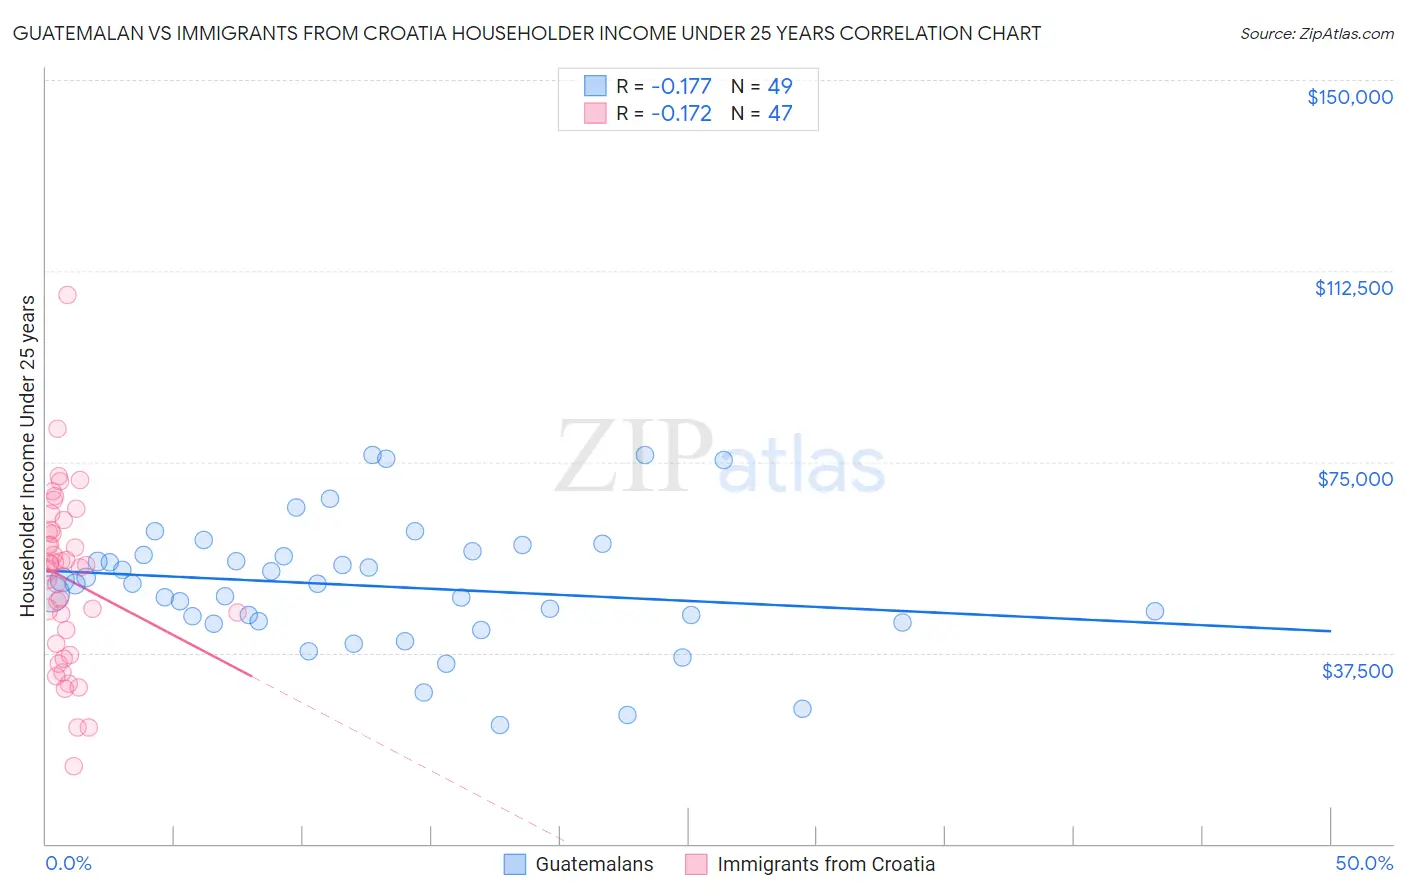 Guatemalan vs Immigrants from Croatia Householder Income Under 25 years